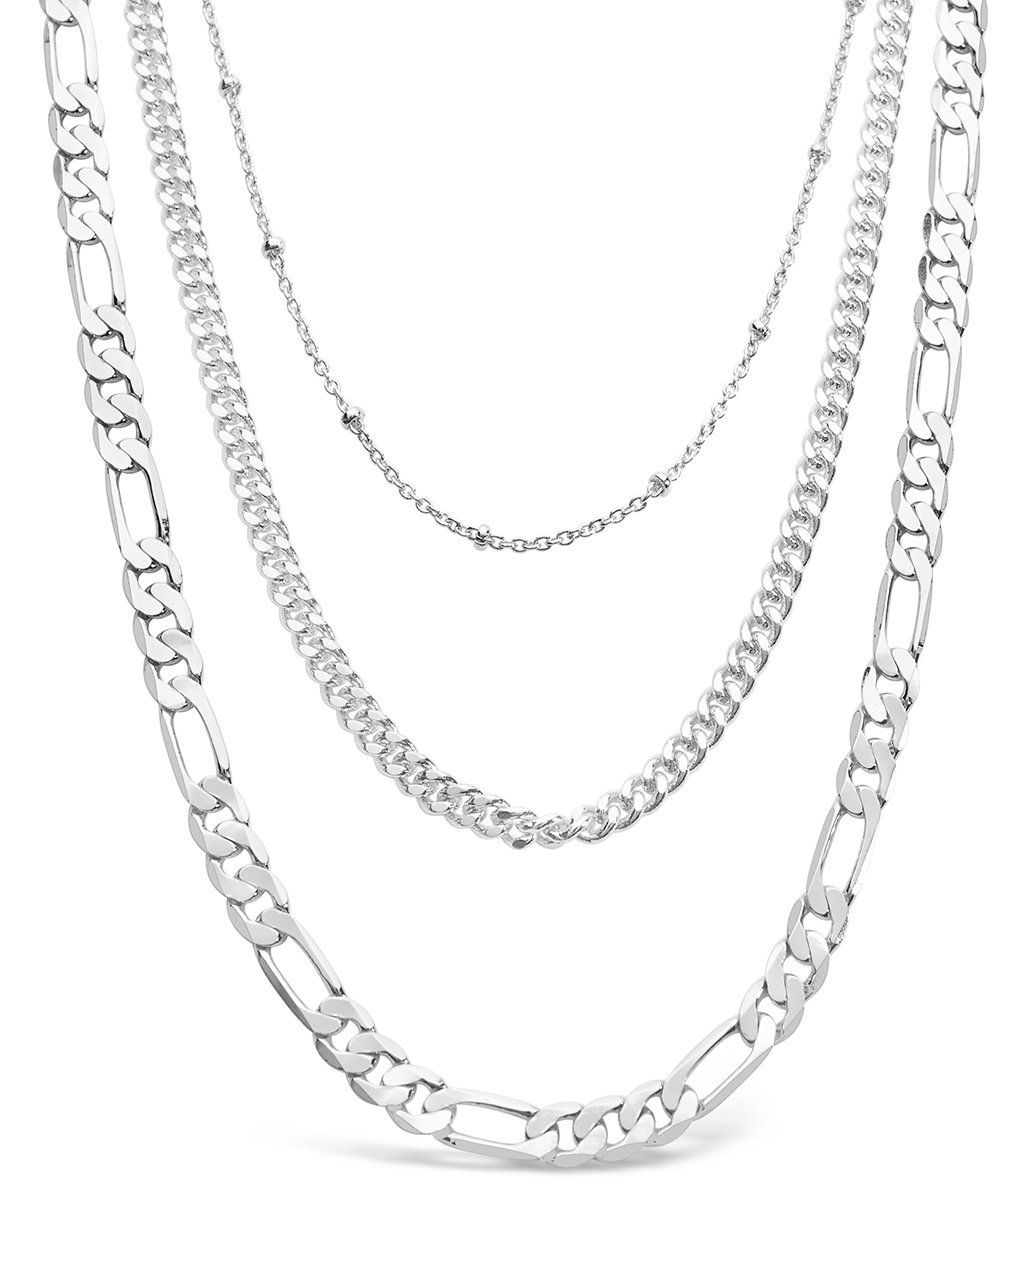 Chic and Elegant: Stylish Silver Chains